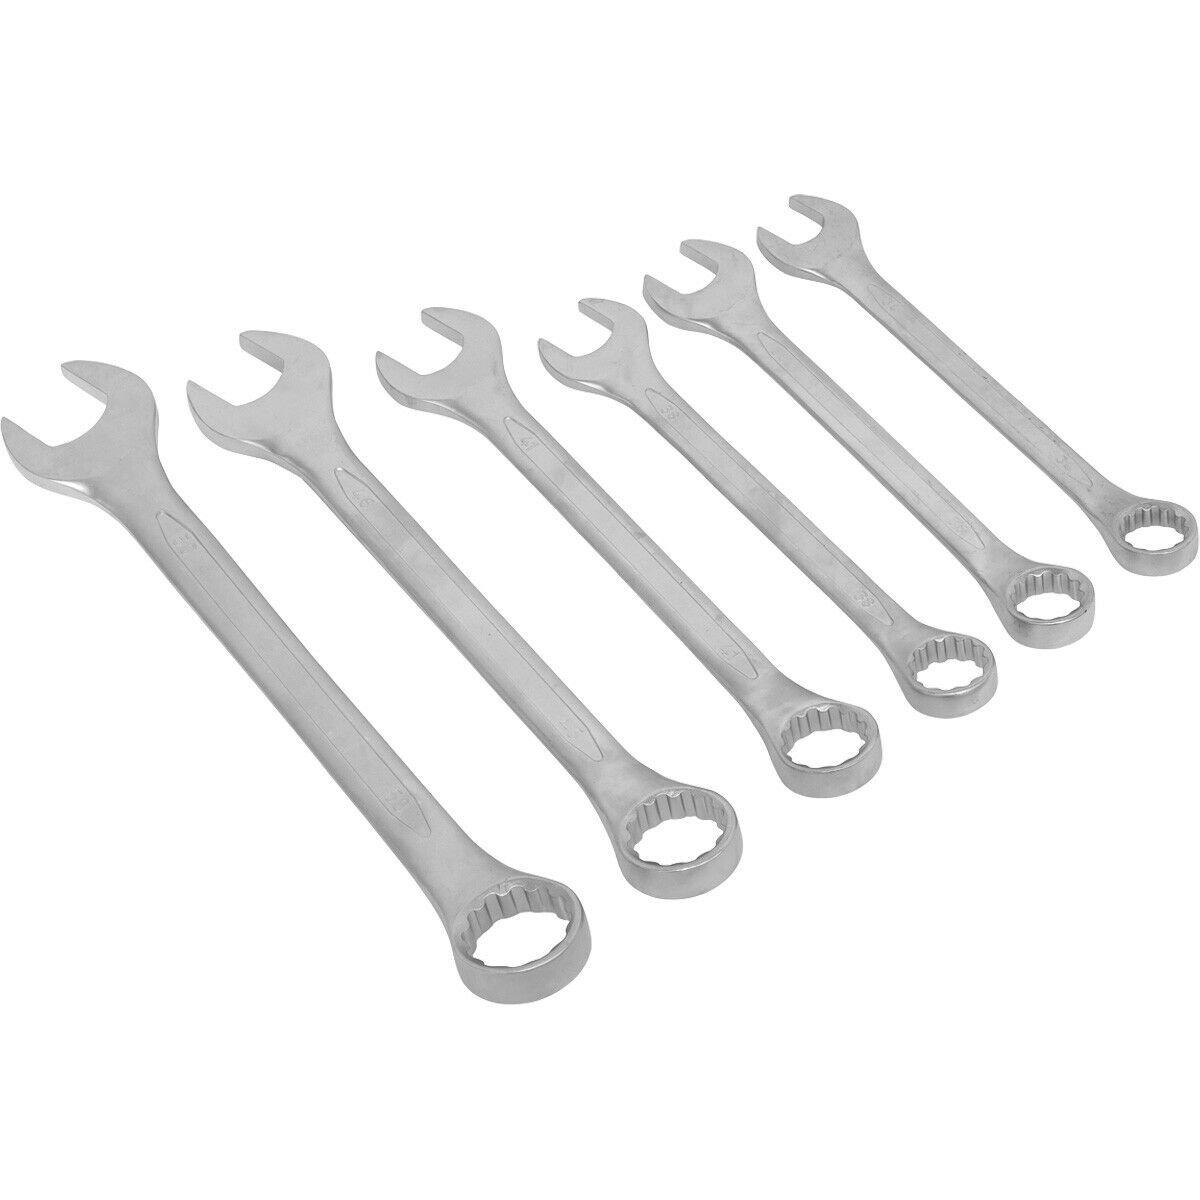 6pc EXTRA LARGE Combination Spanner Set - 34mm to 50mm 12 Point WallDrive Wrench